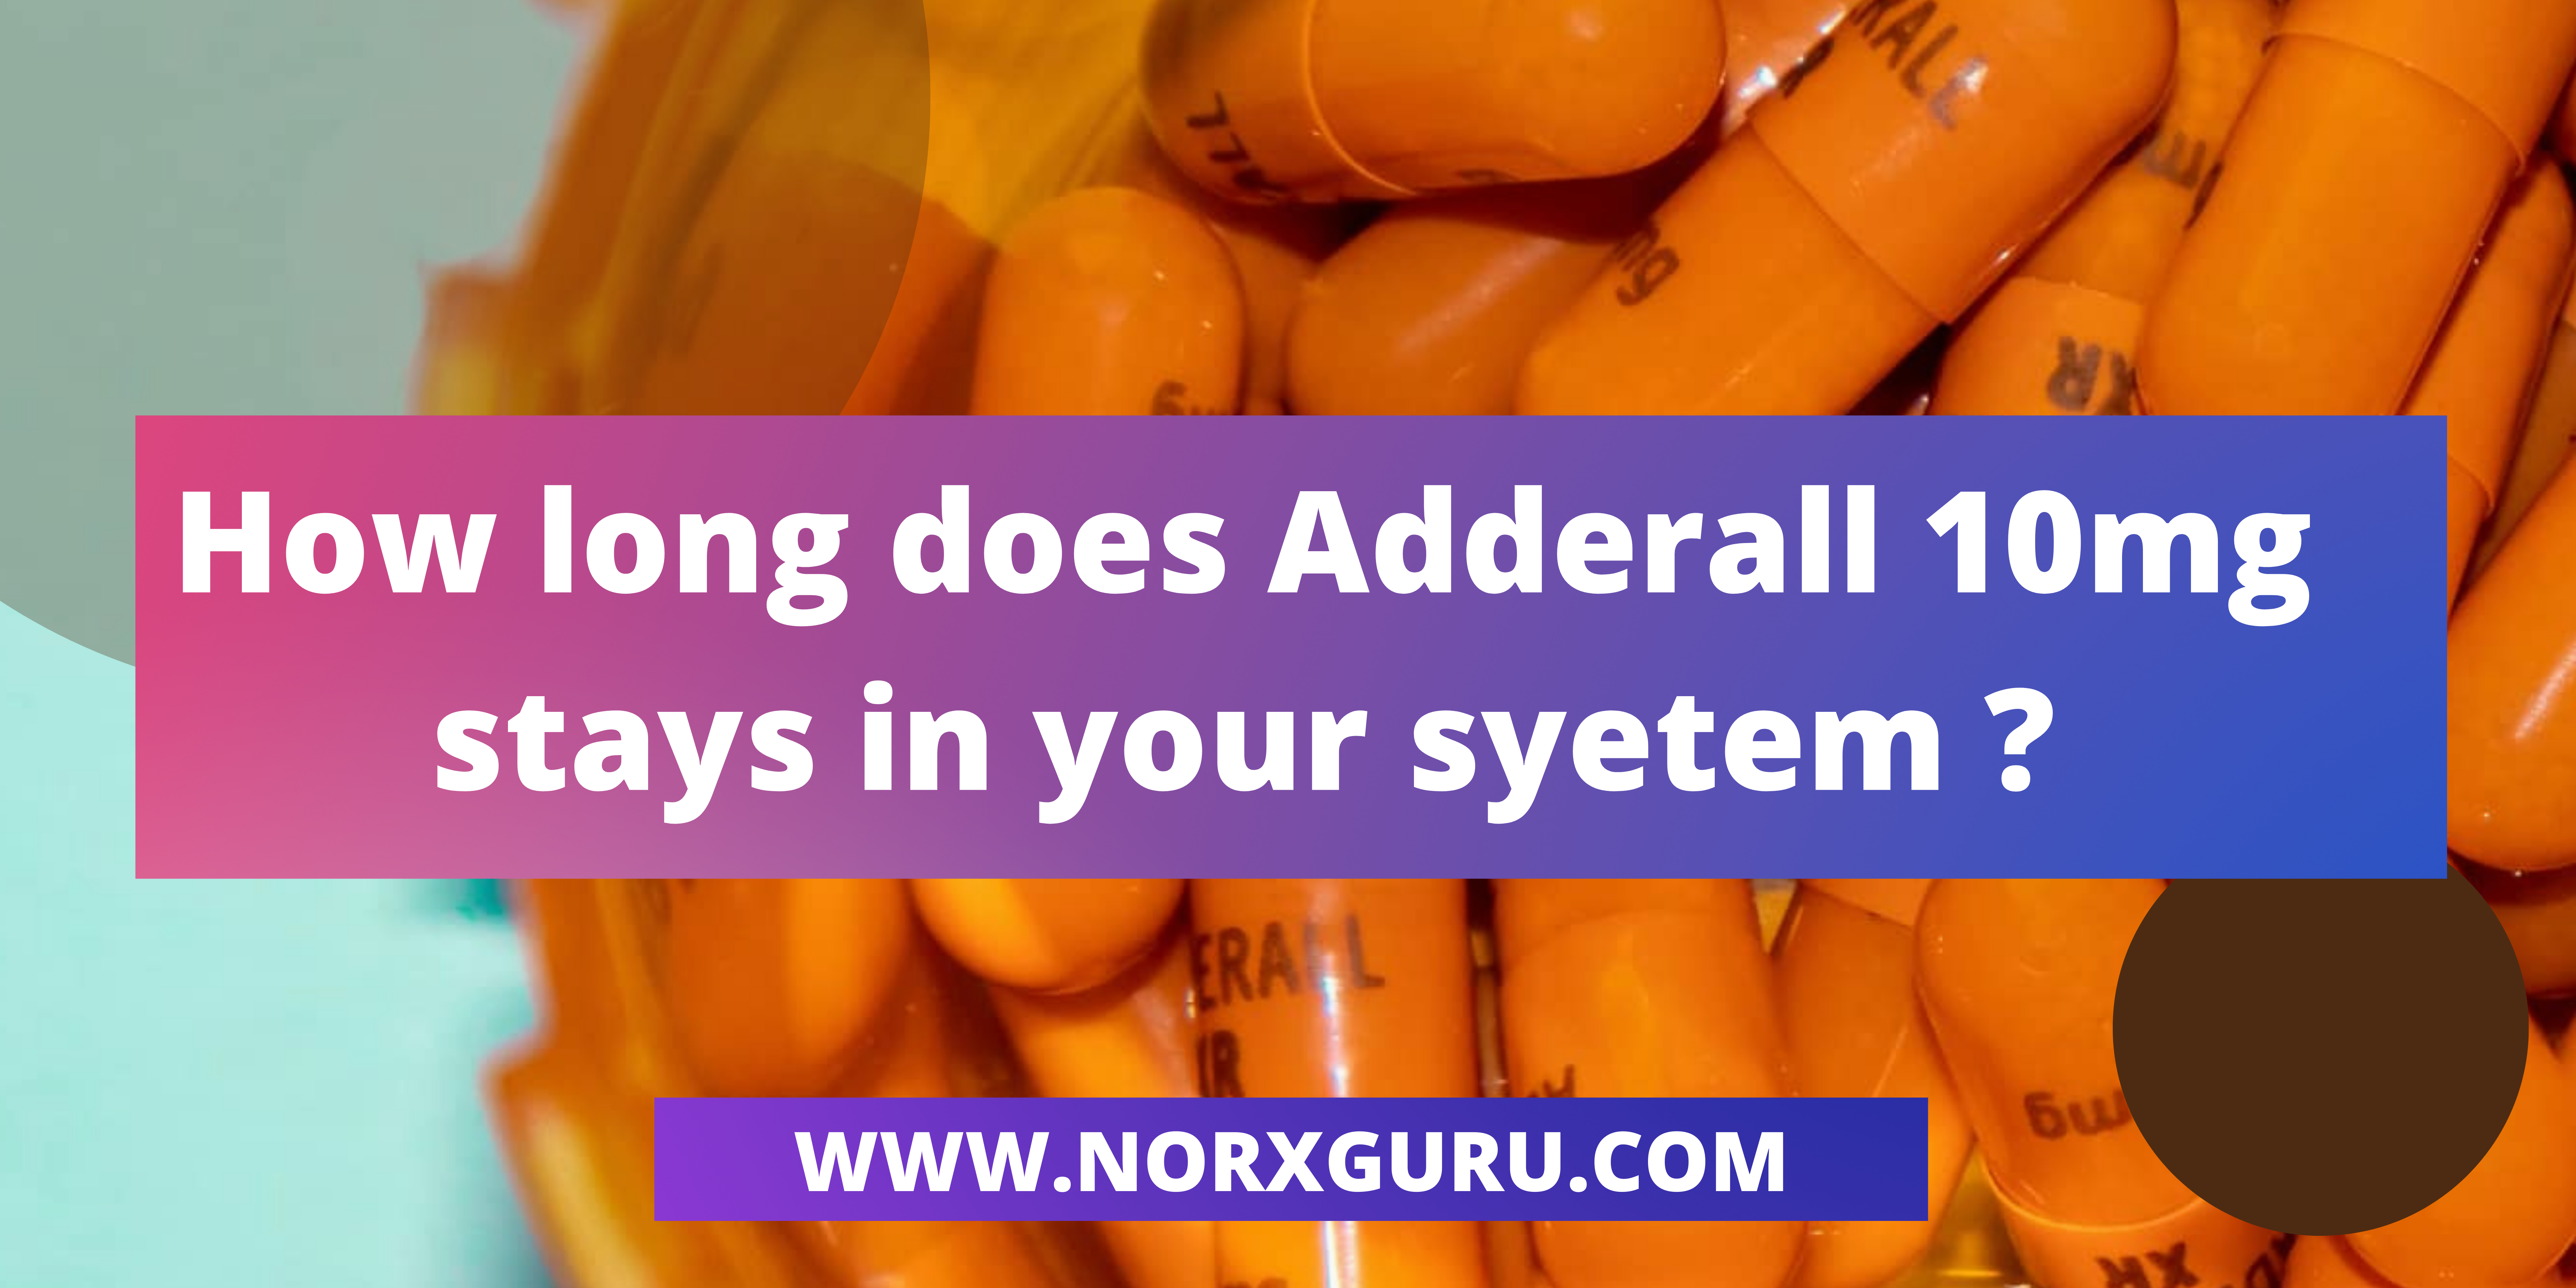 How long does Adderall 10mg stay in your system?